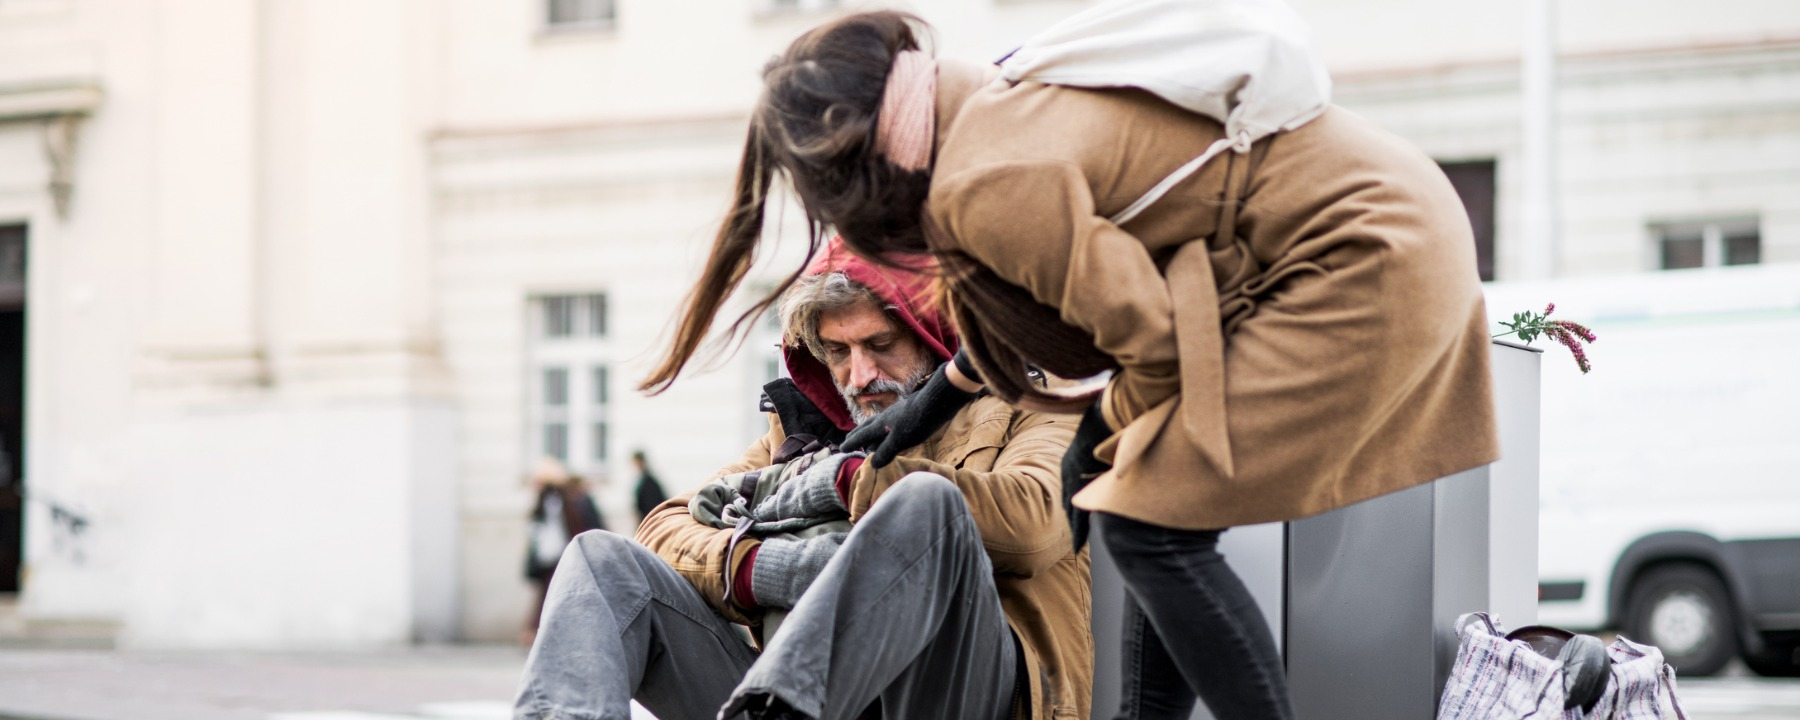 Young woman giving money to homeless beggar man sitting in city